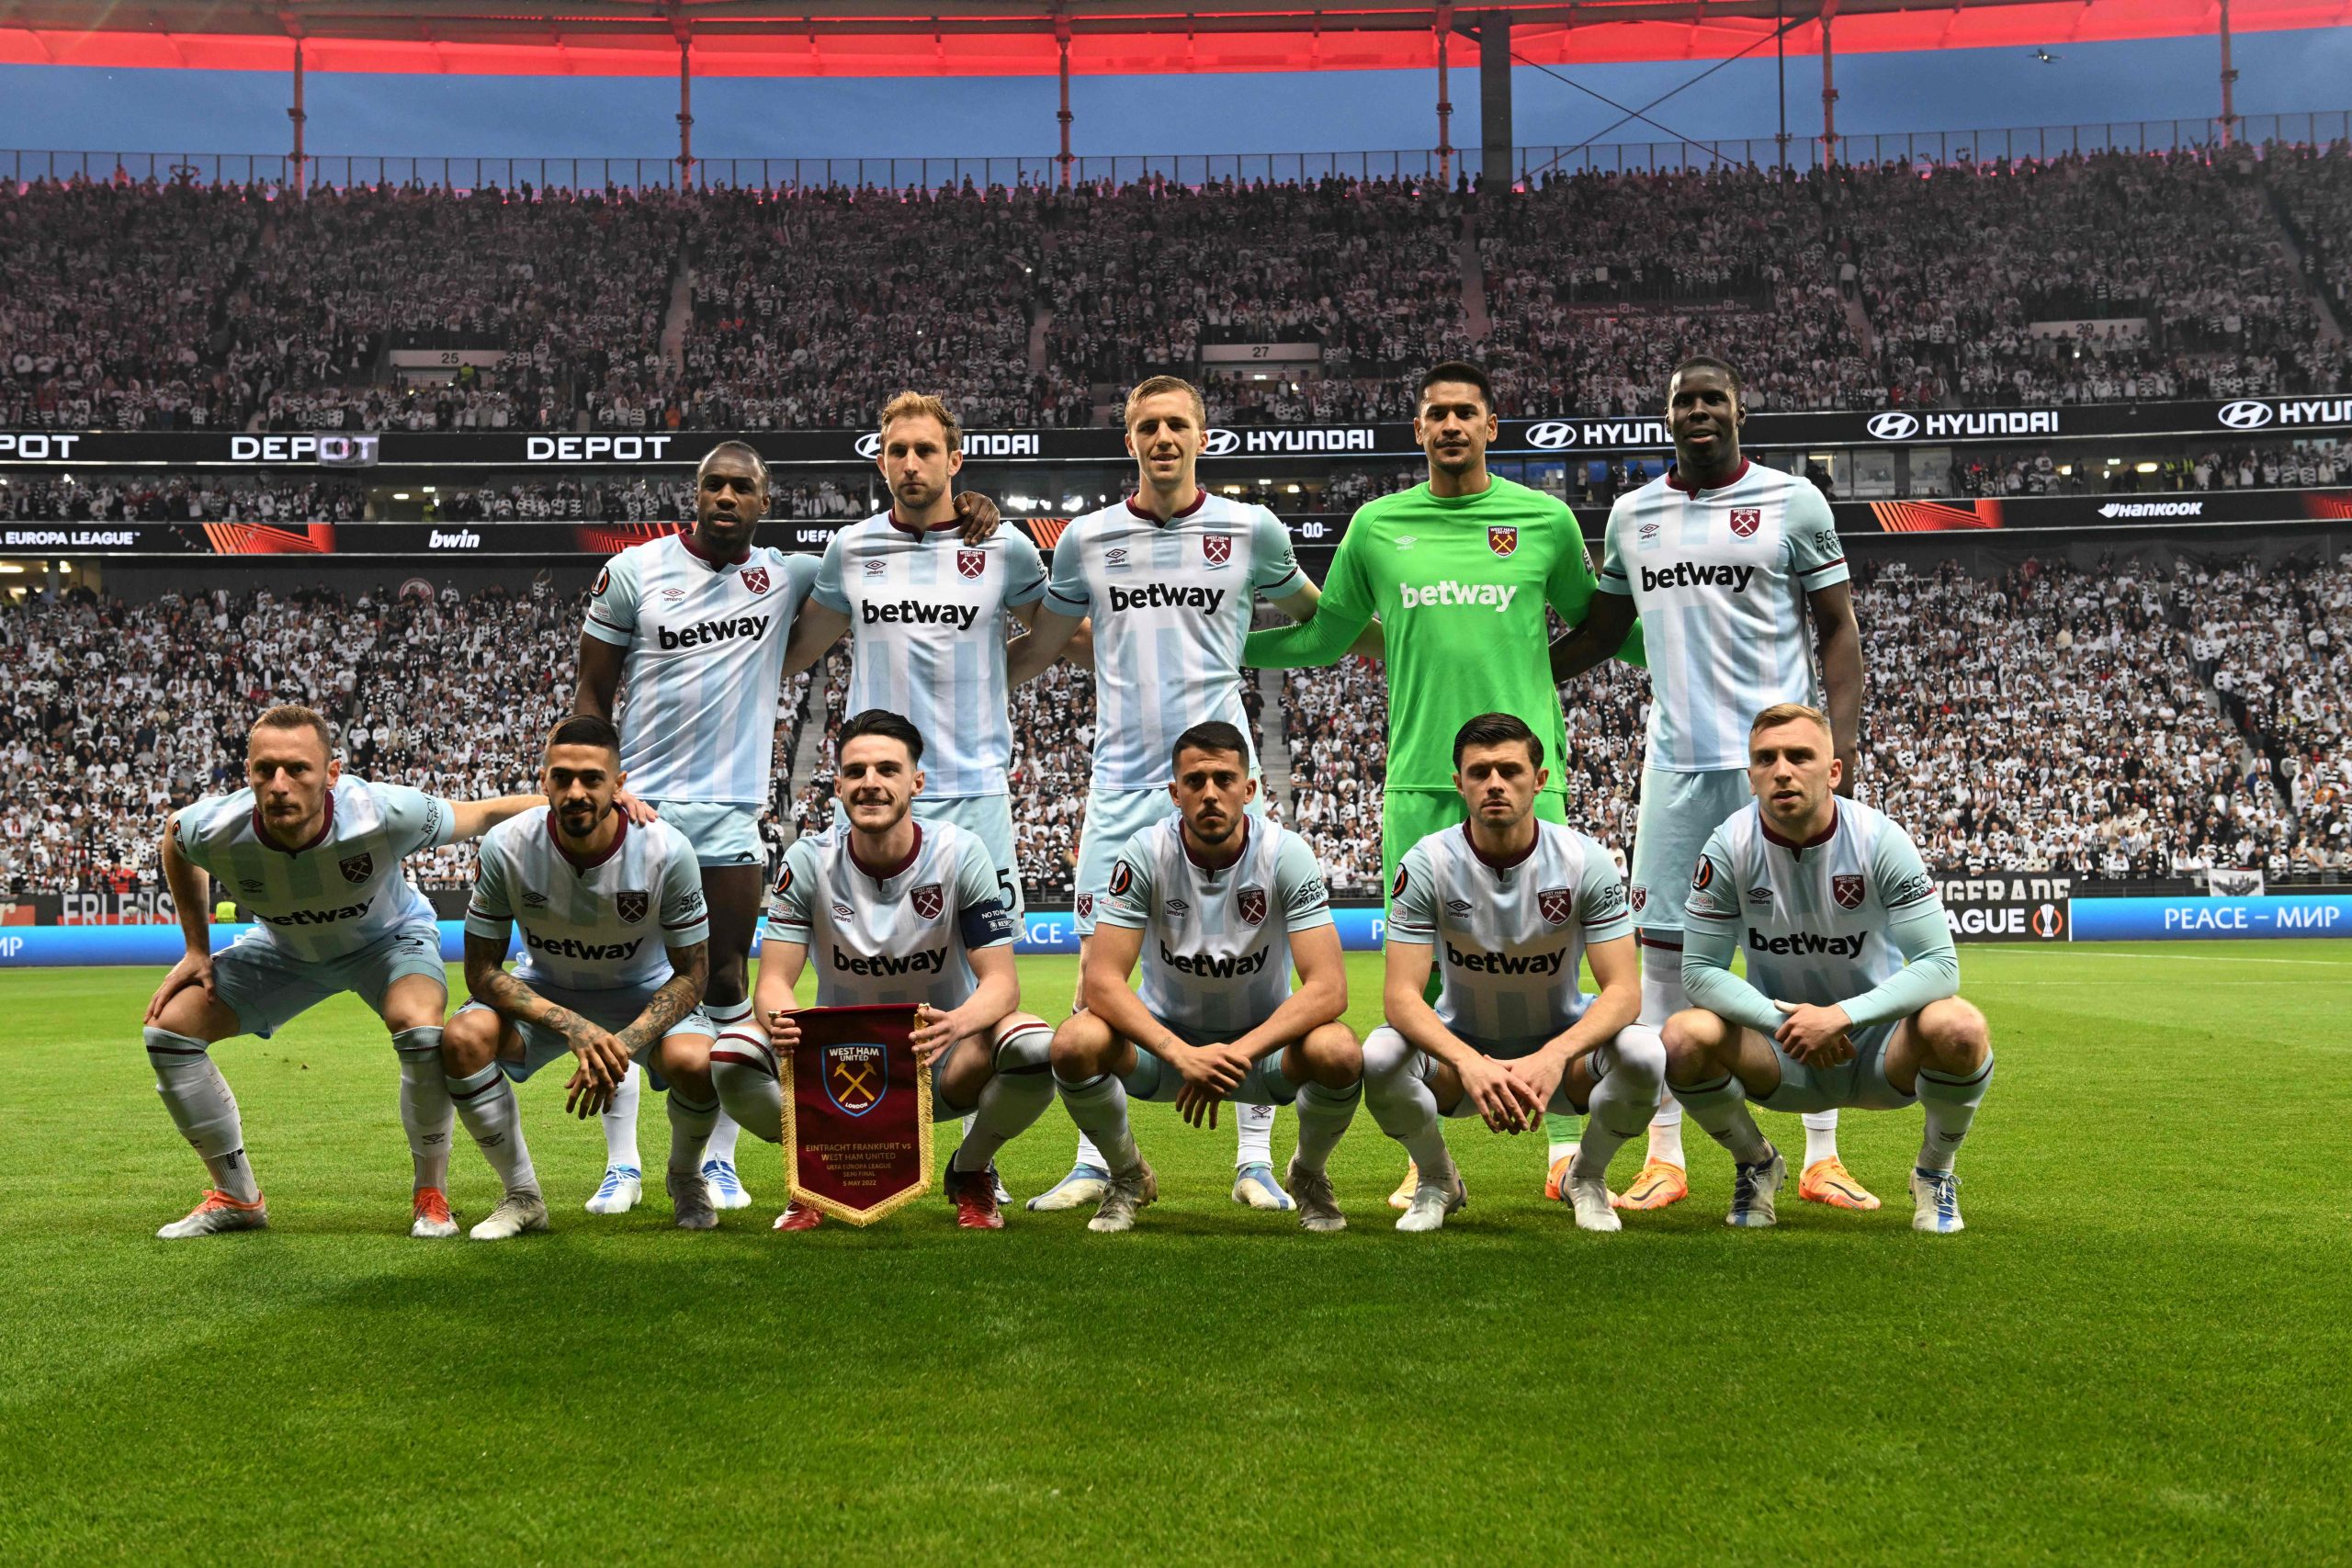 West Ham United lined up before the semifinal clash